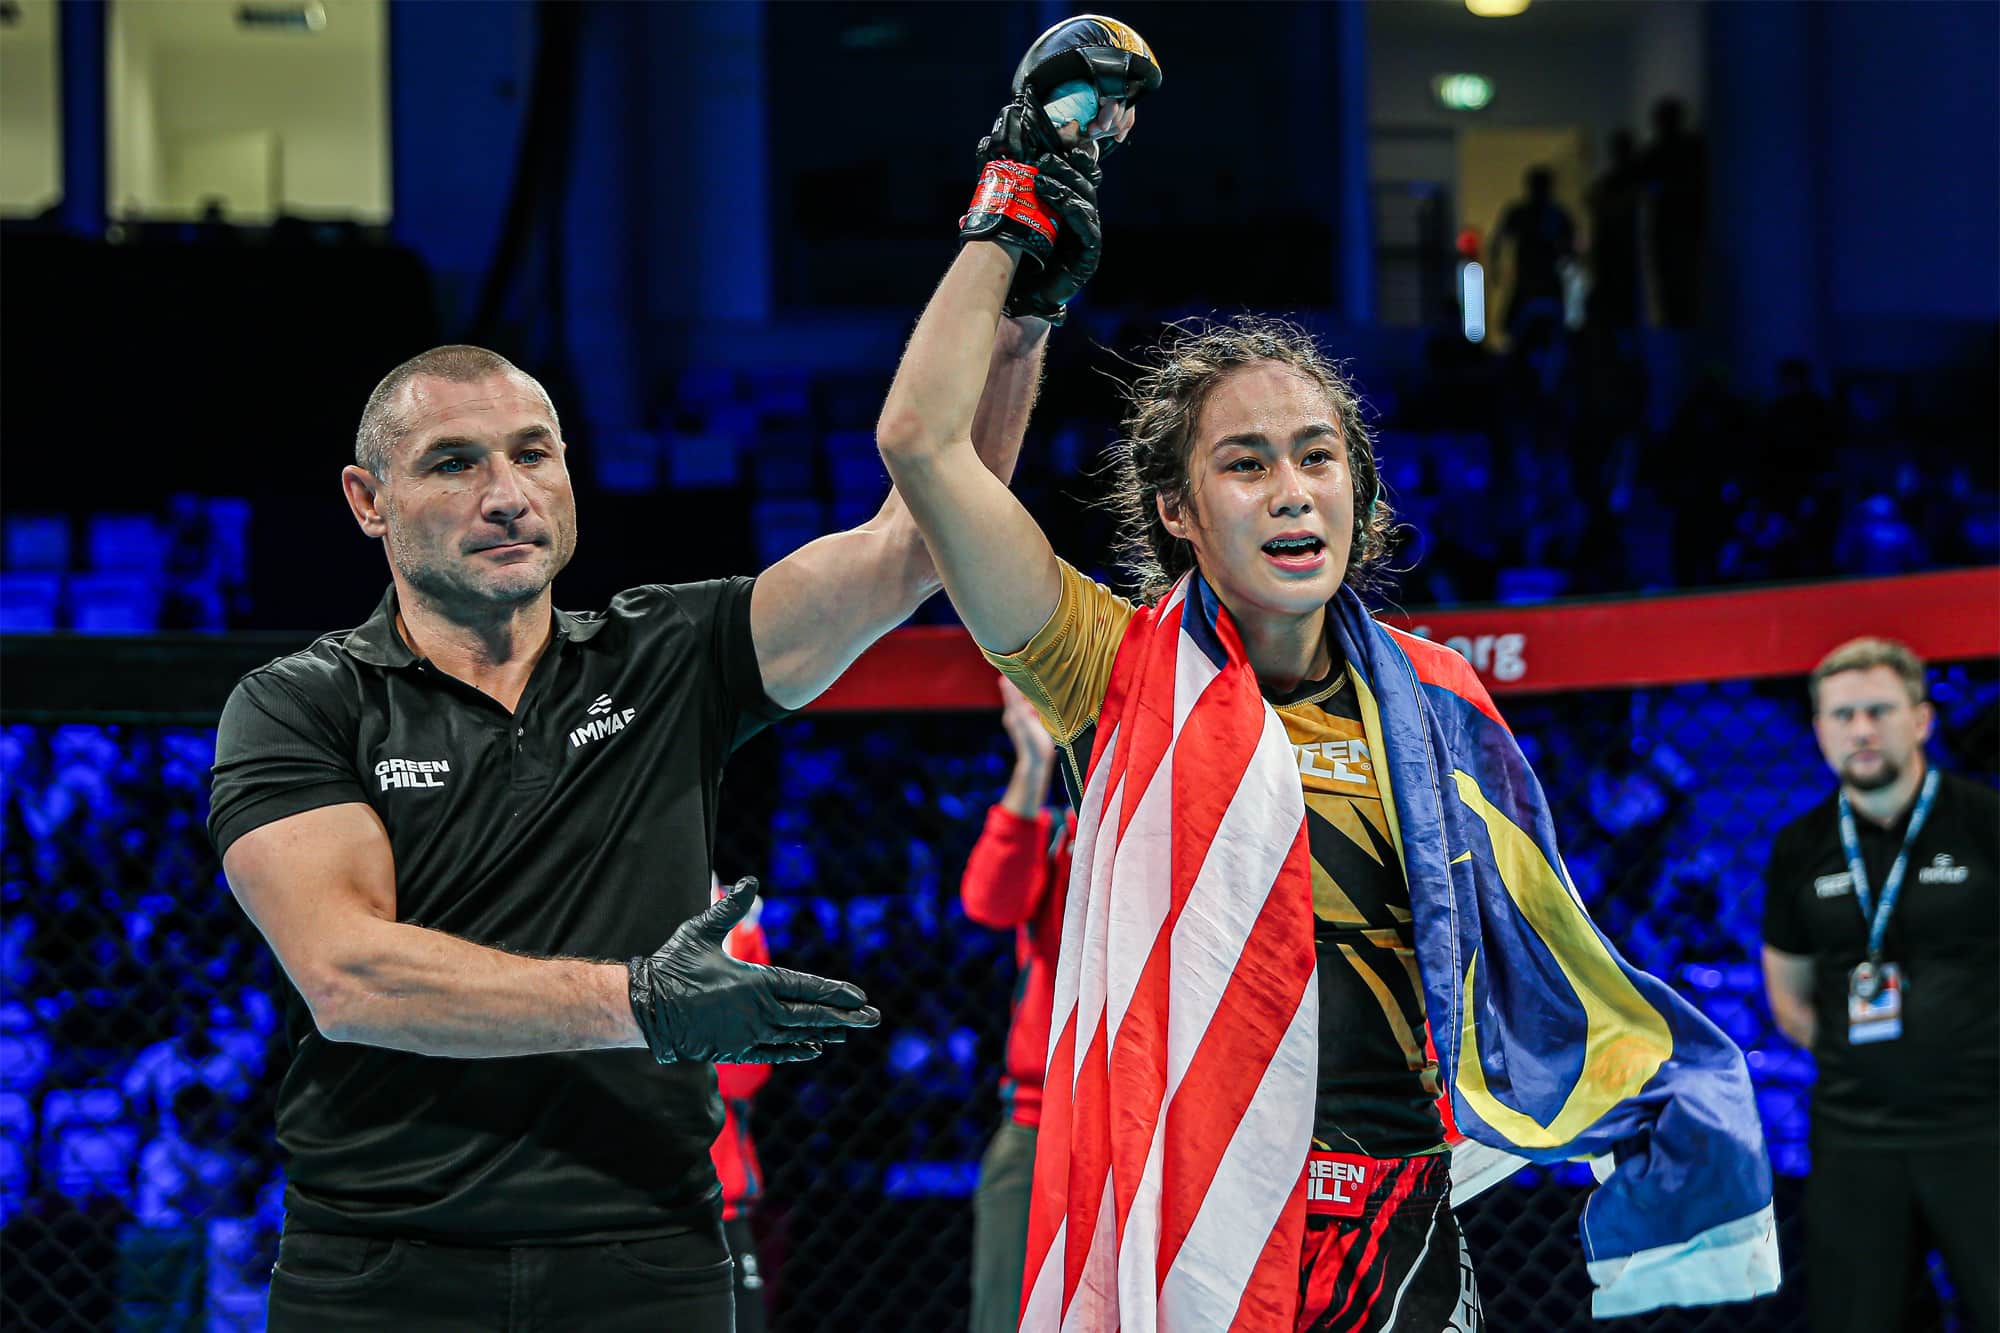 IMMAF launches Athlete Influencer Panel as part of Social Media Harm Prevention drive